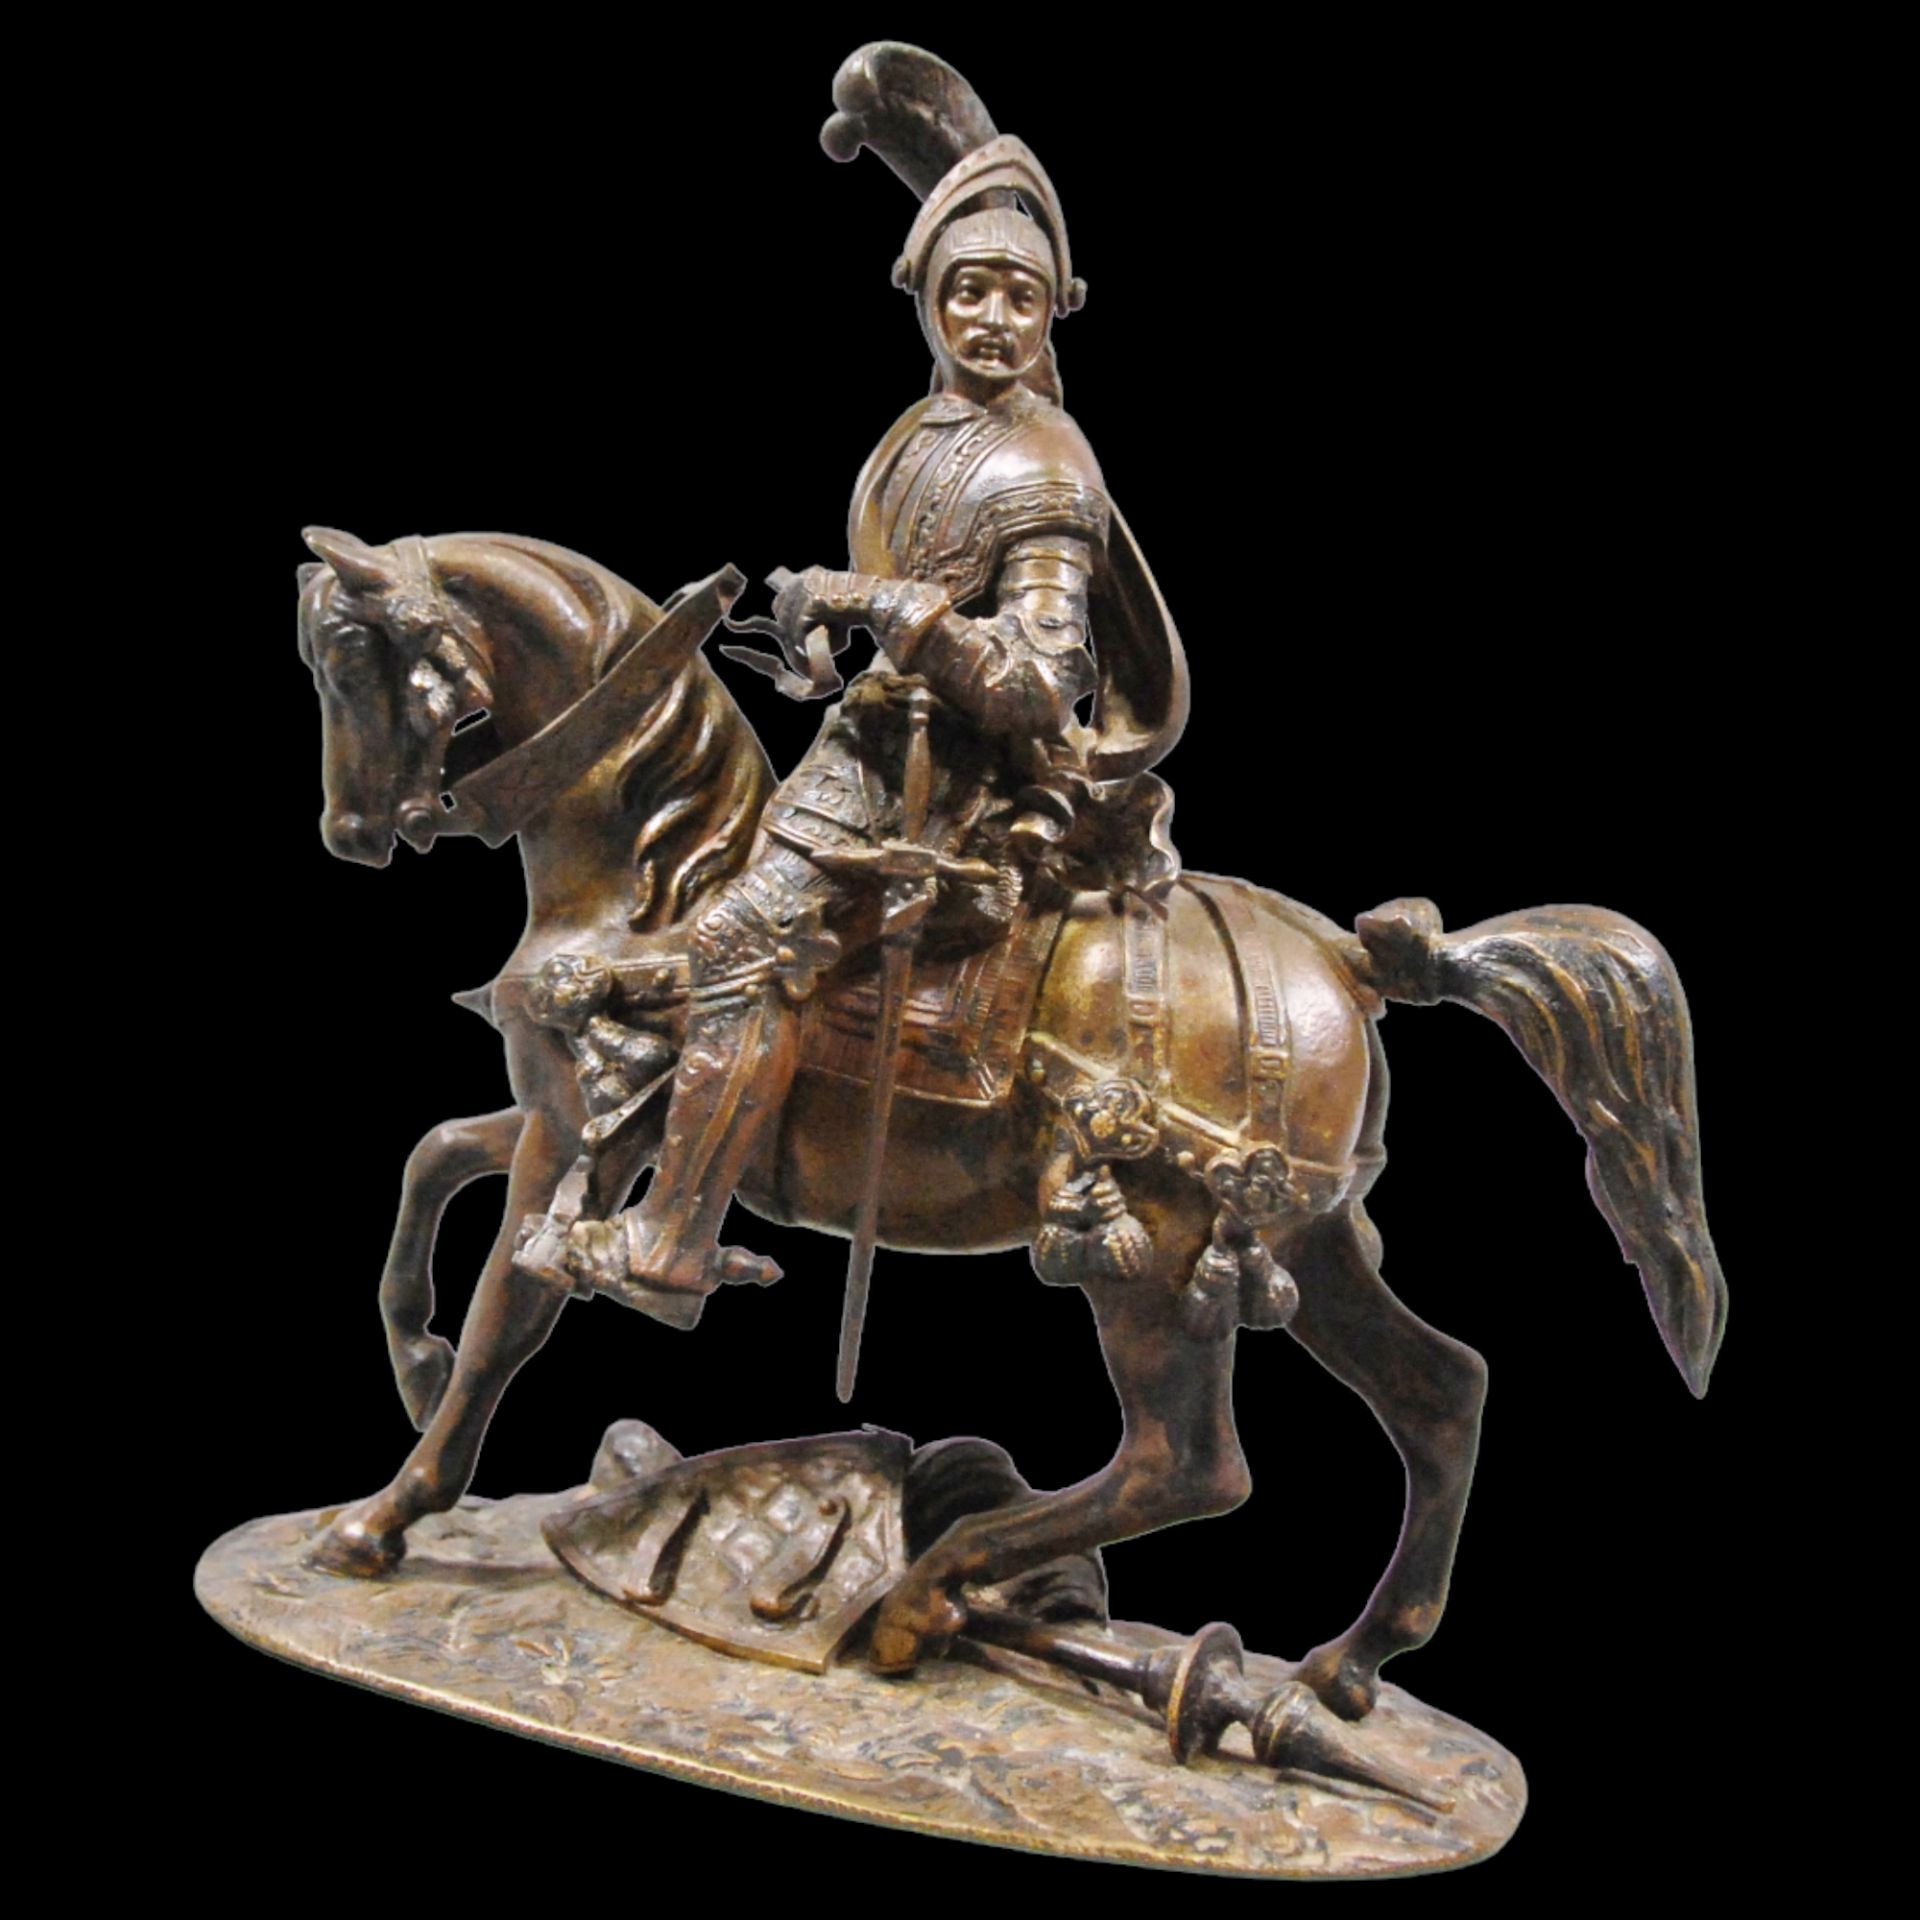 A bronze composition depicting an equestrian knight of the medieval period at a tournament. - Image 2 of 12